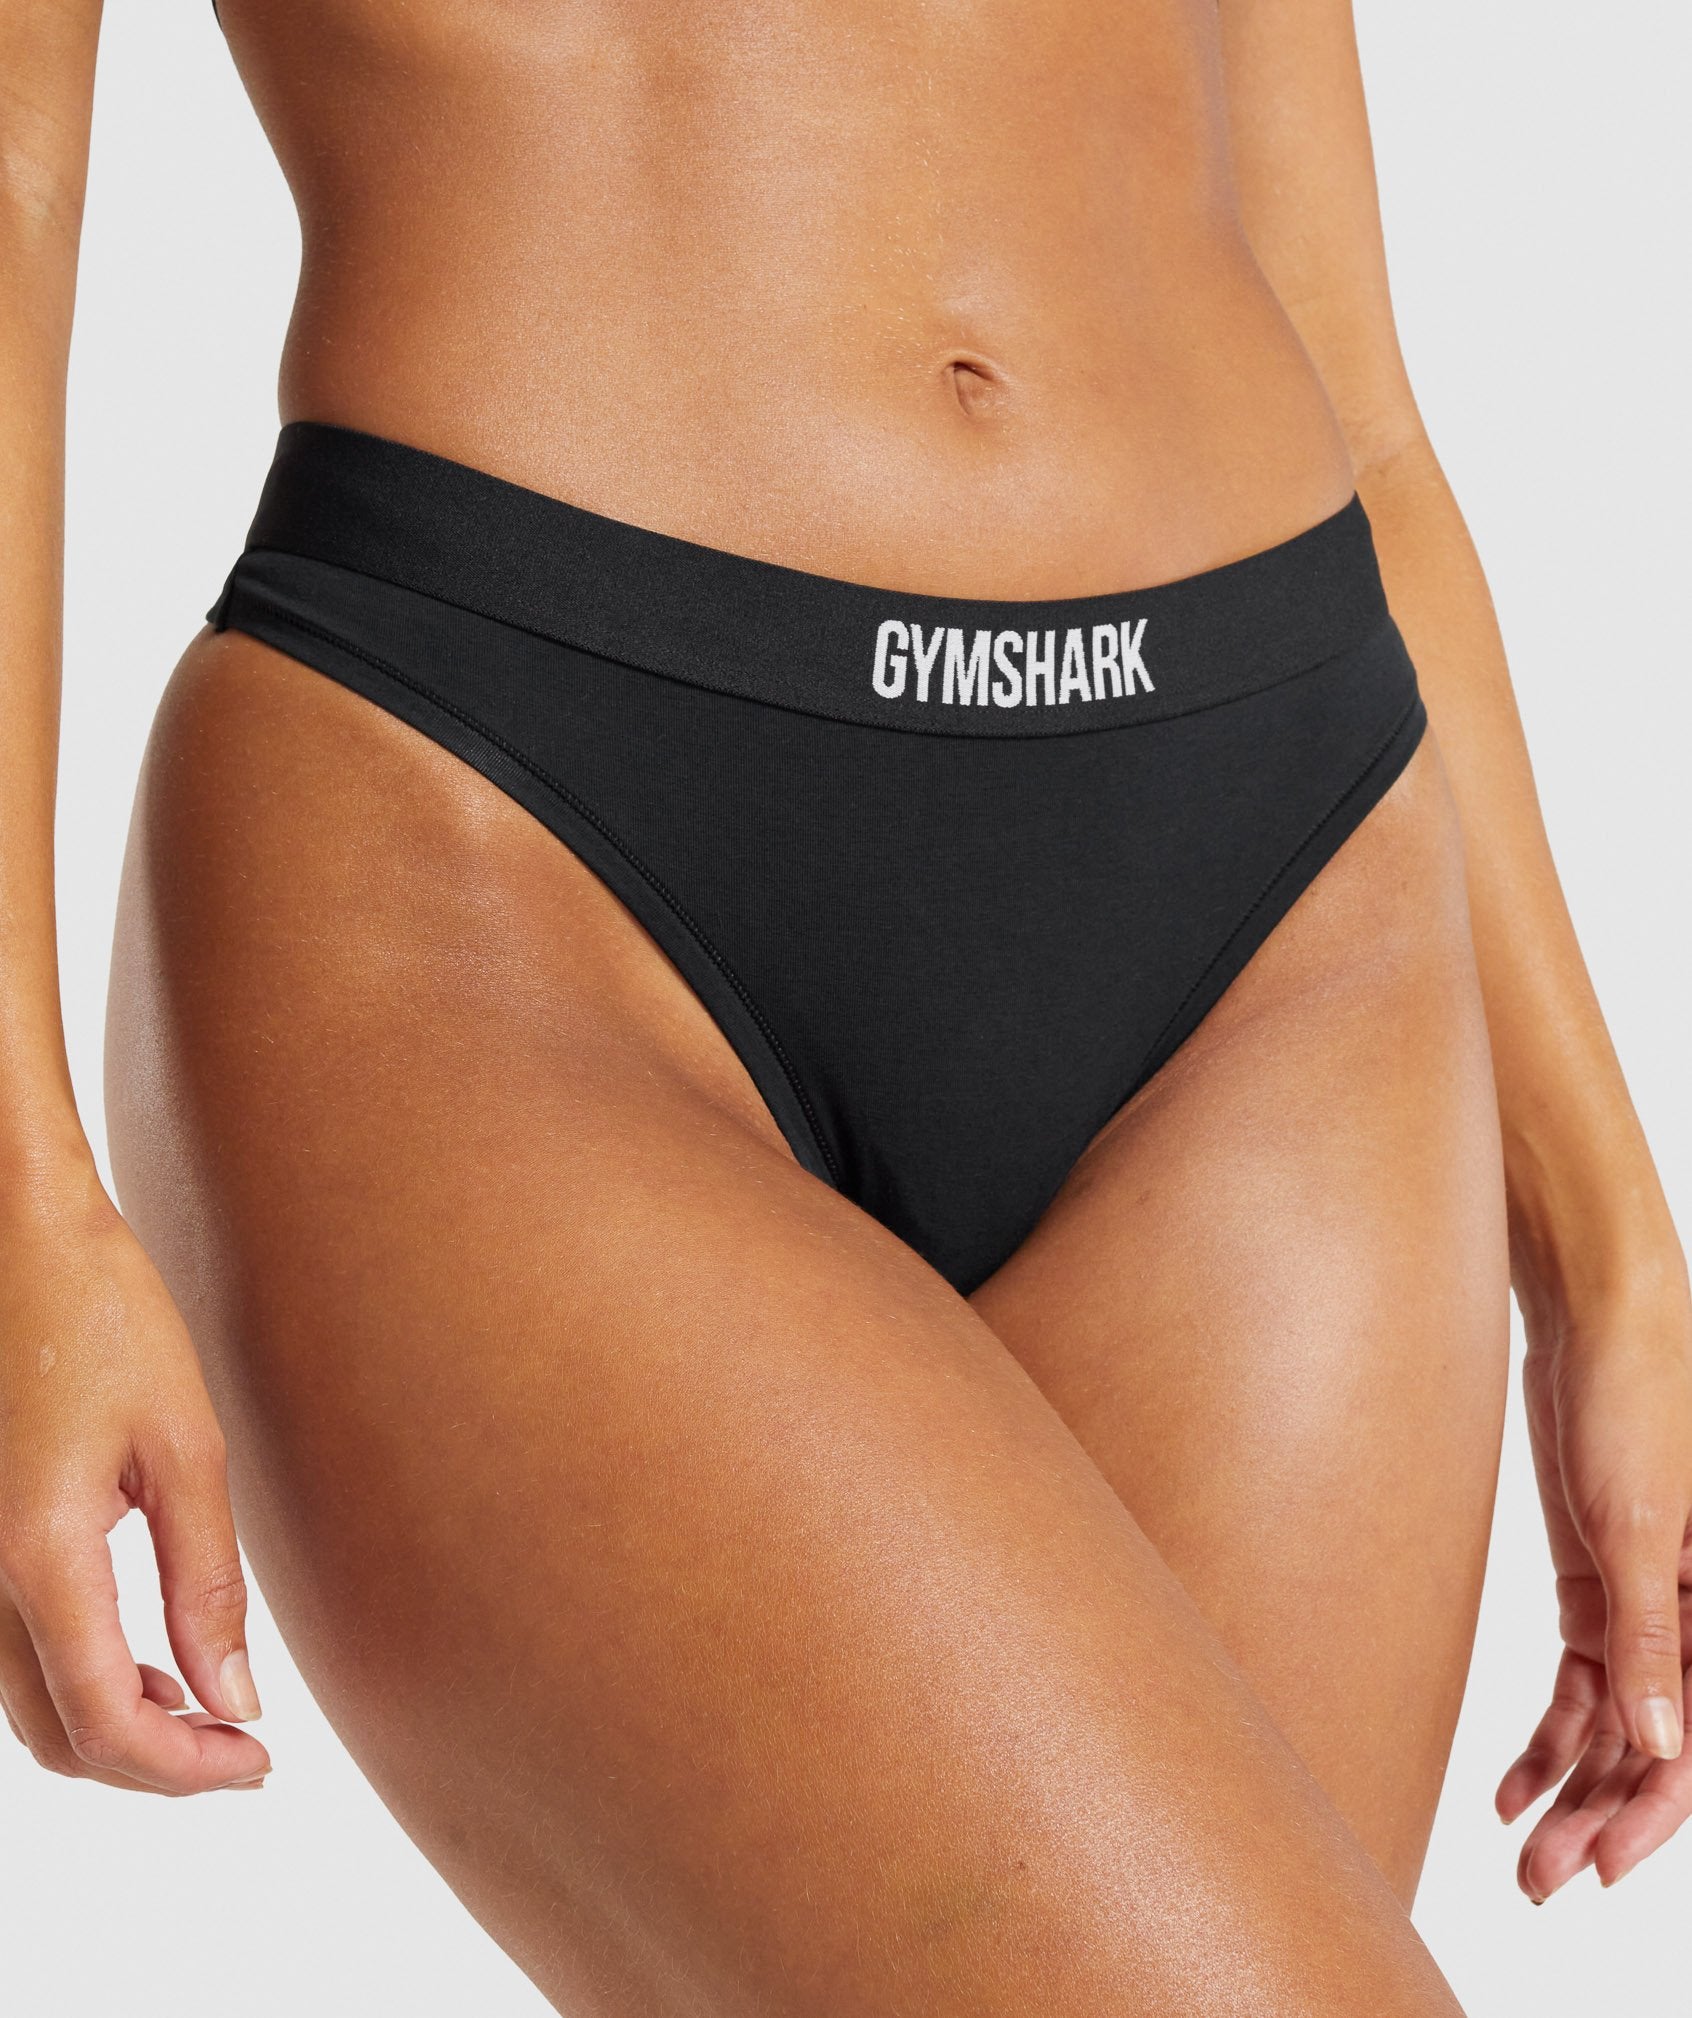 Gymshark Women's Essential Cotton Thong 2 Pack, Black, Small